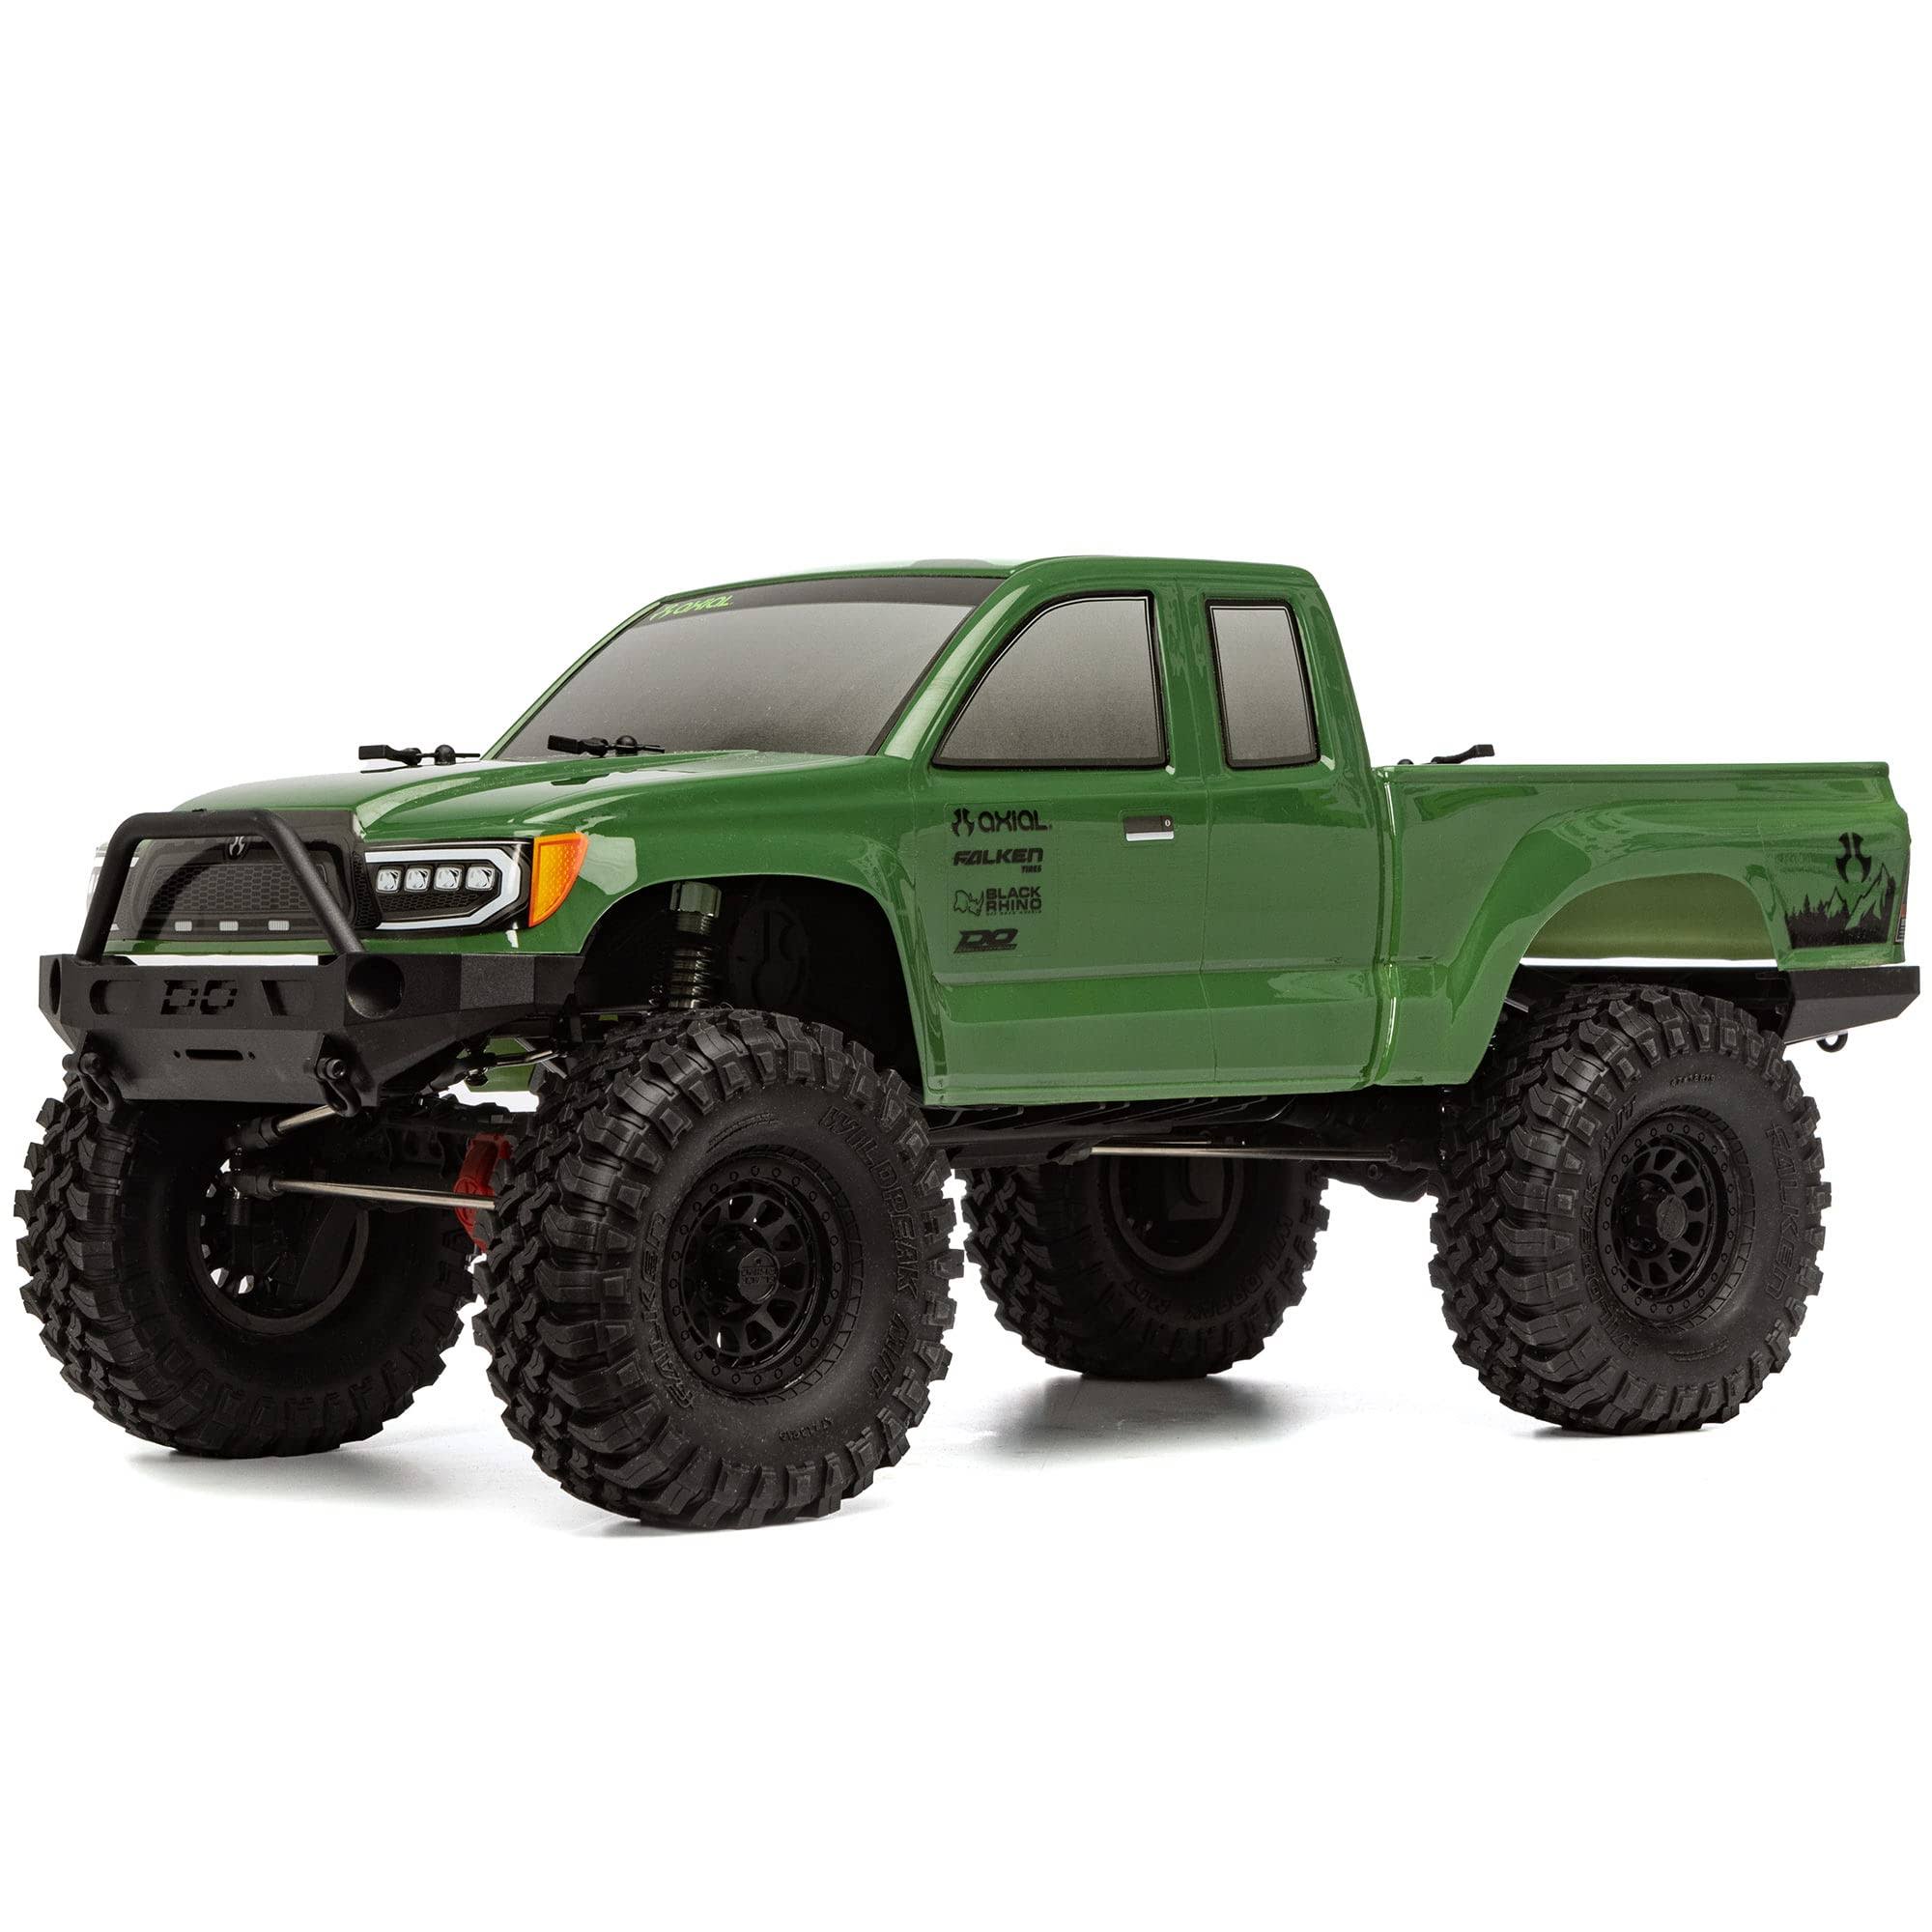 Axial 1/10 Scx10 III Base Camp 4WD Rock Crawler Brushed RTR, Green, AXI03027T2